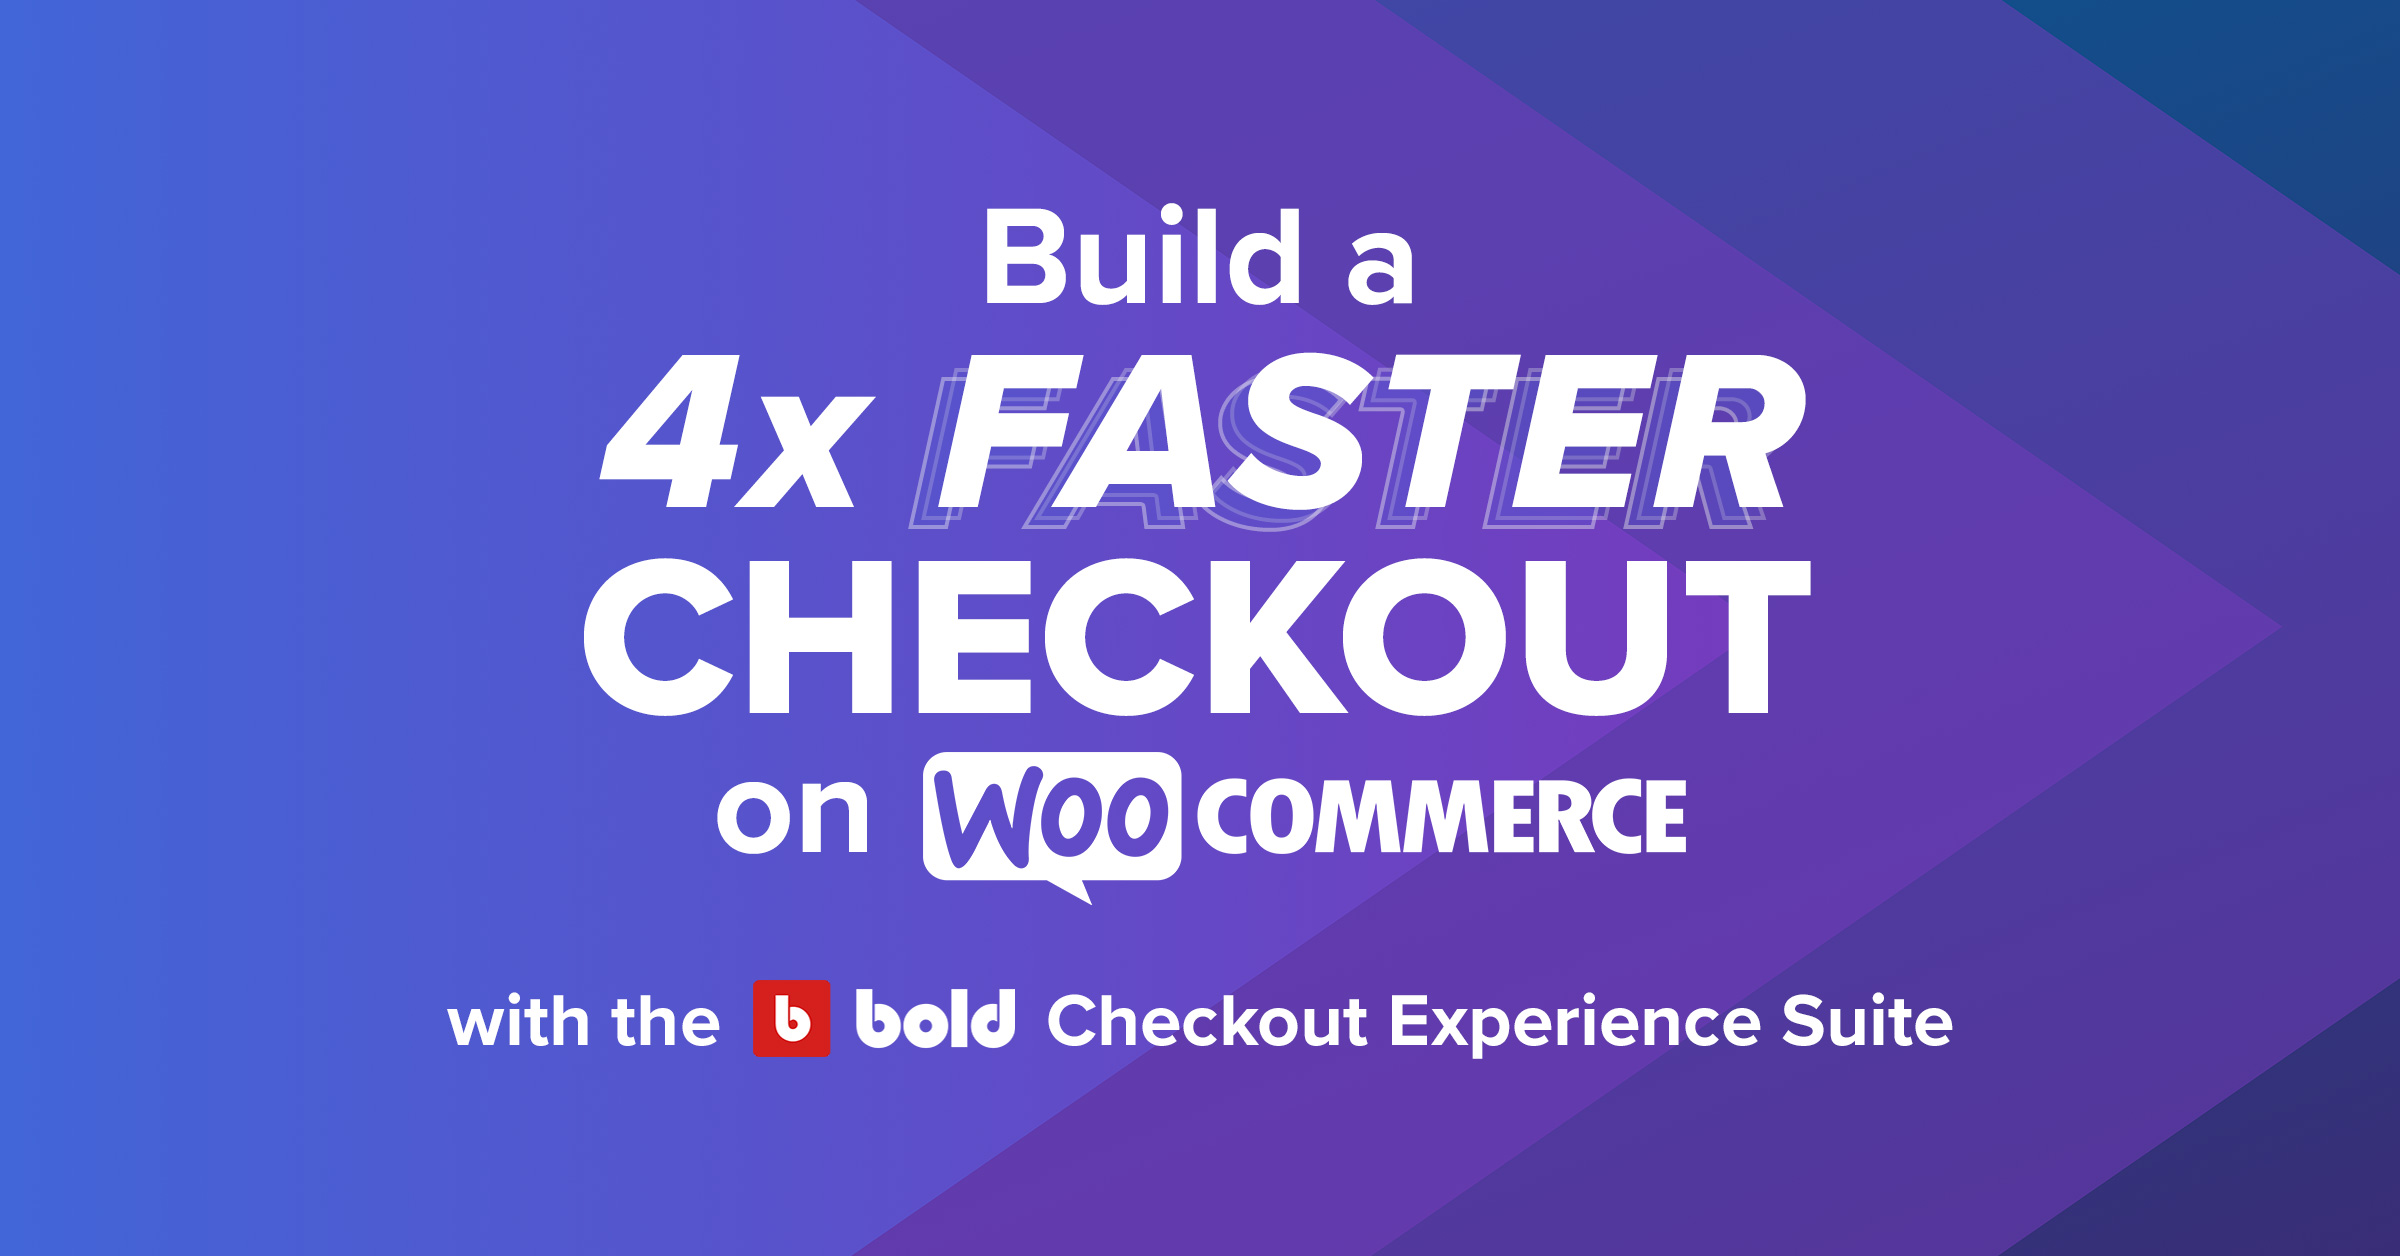 Build a 4x faster checkout on WooCommerce with Bold Checkout.